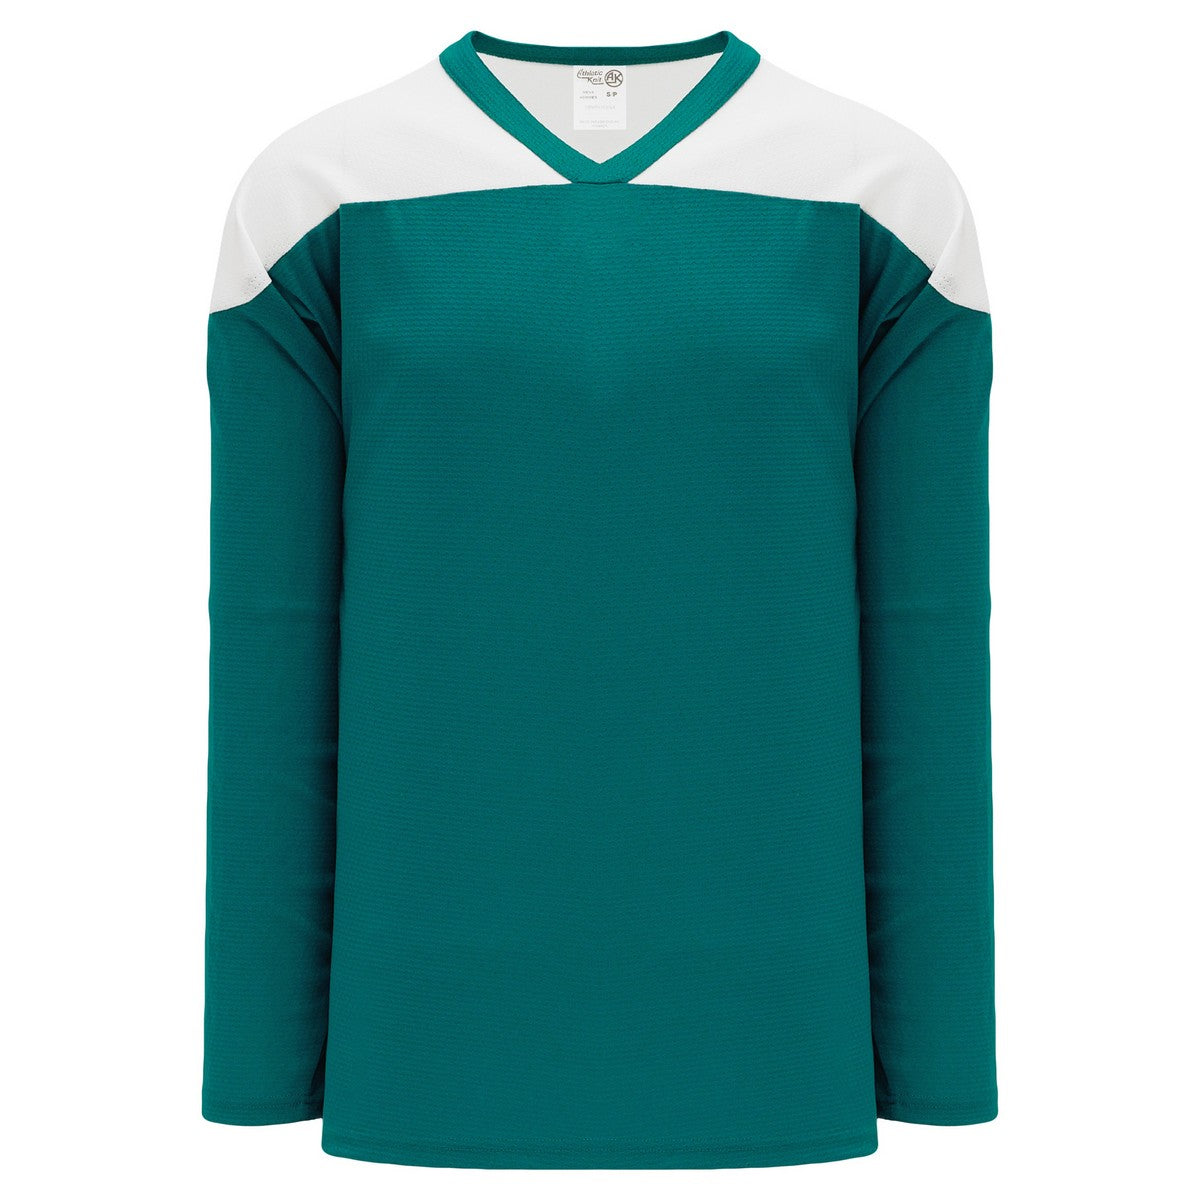 League Series H6100 Jersey Teal-White